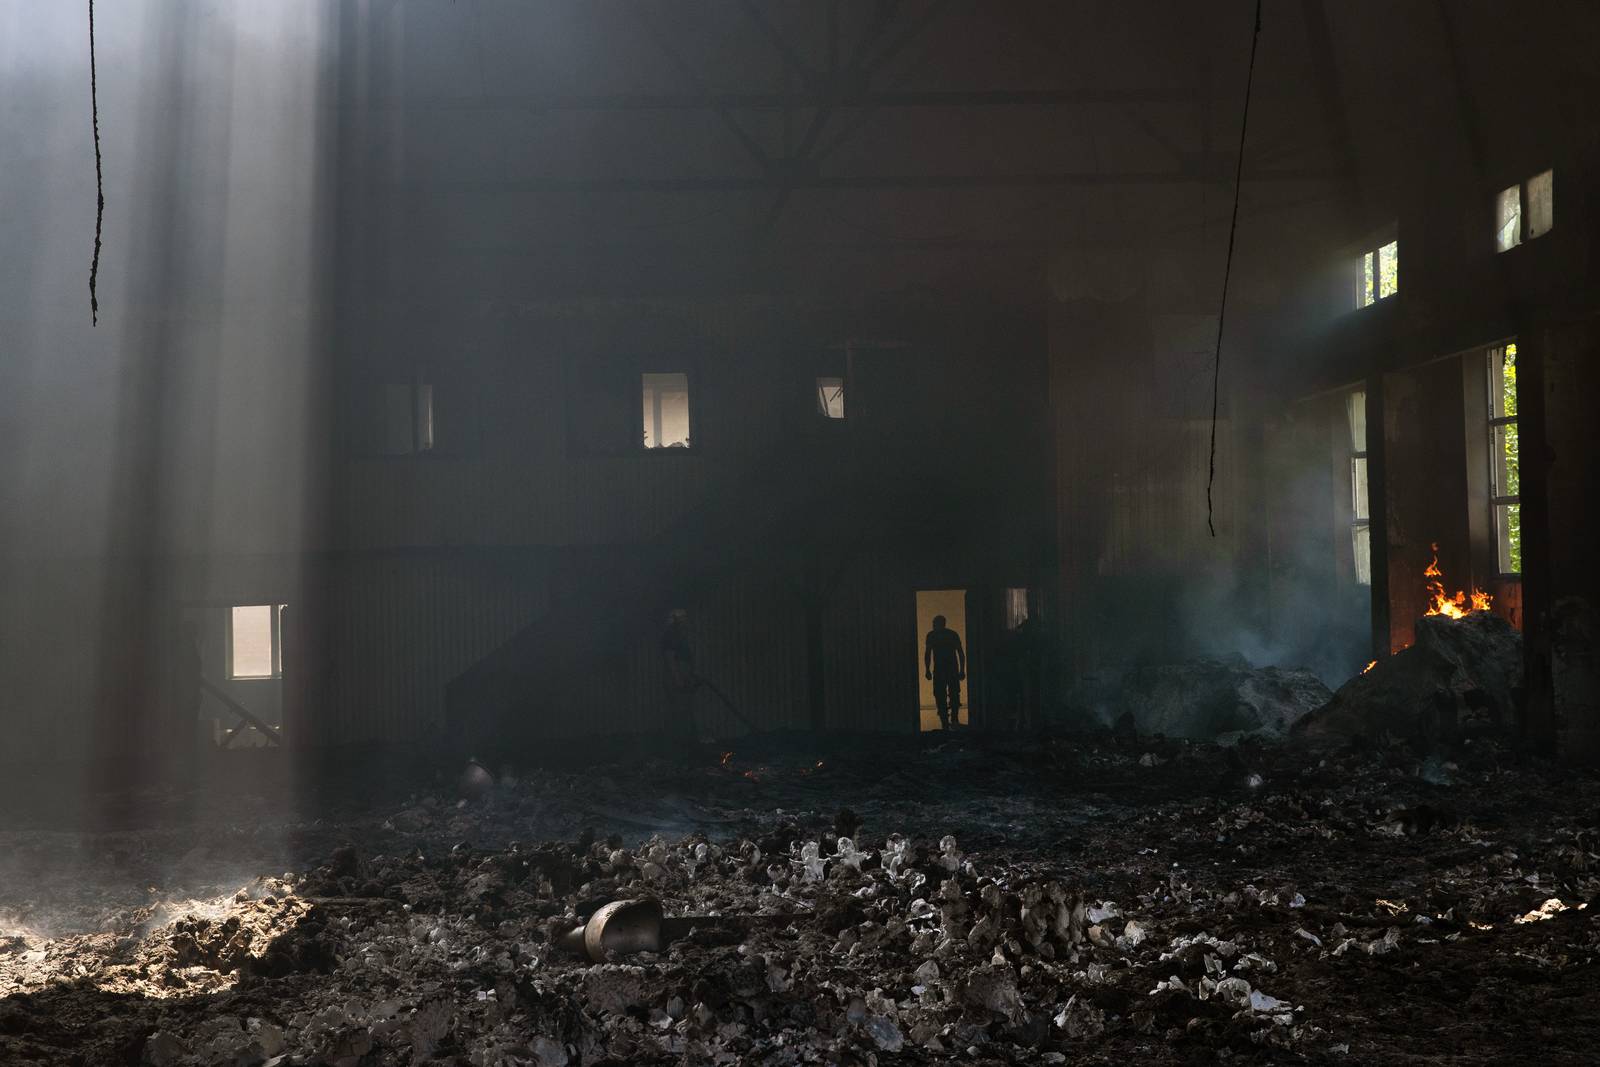 A bombed warehouse in Sloviansk in Ukraine: The longer the war goes on the greater will be Ukraine’s human, material and territorial losses, putting in peril the future viability of an independent Ukrainian state. Photograph: Tyler Hicks/New York Times